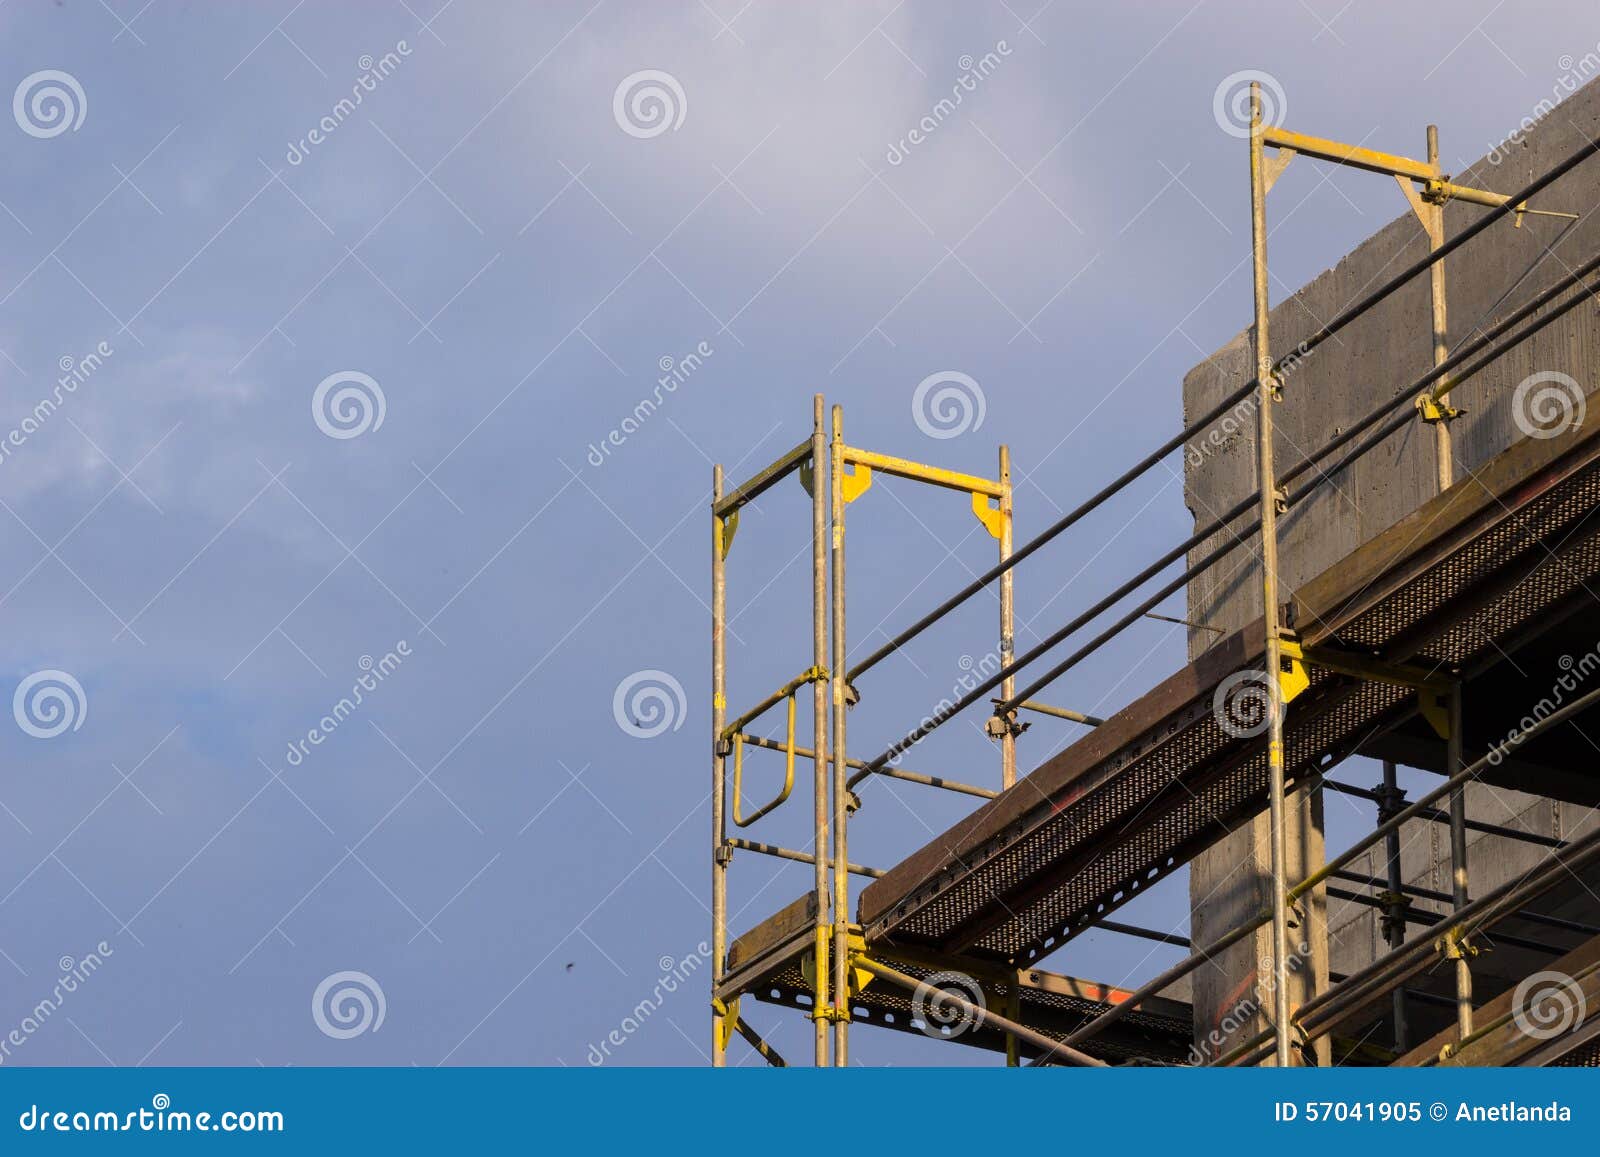 Wall of Concrete Building. Construction Site Works. Stock Image - Image